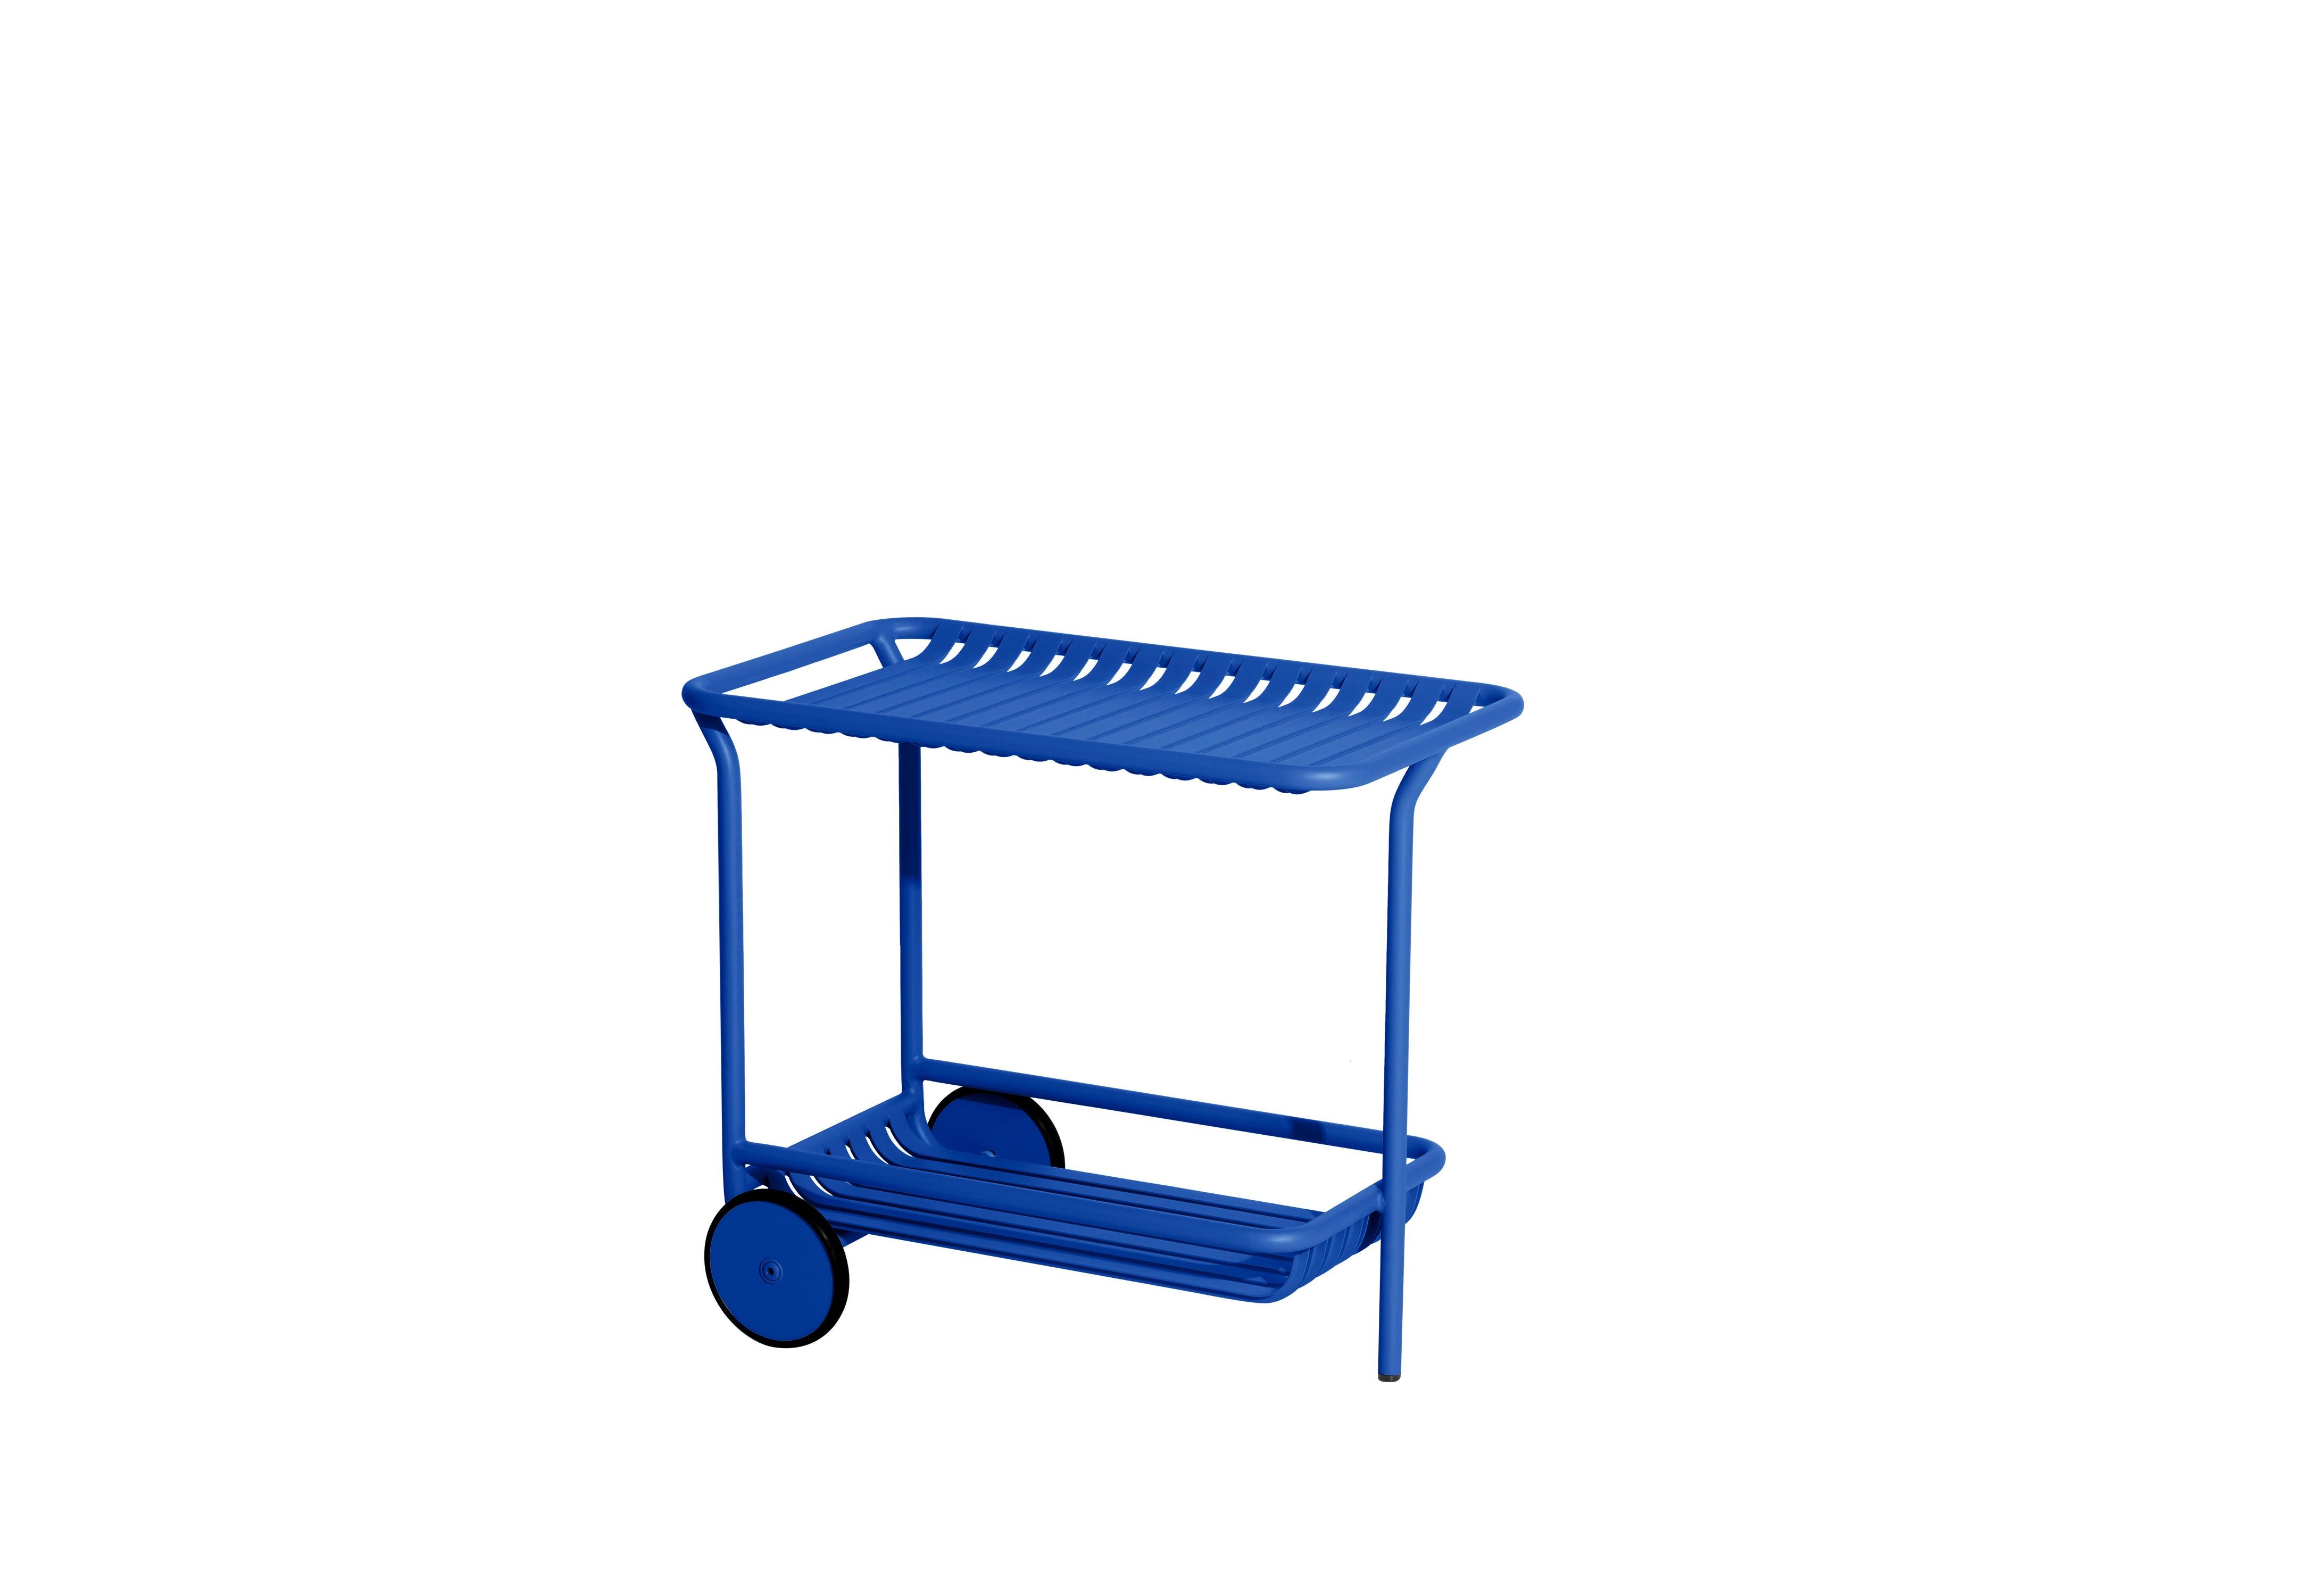 Petite Friture Week-End Trolley in Blue Aluminium by Studio BrichetZiegler, 2017

The week-end collection is a full range of outdoor furniture, in aluminium grained epoxy paint, matt finish, that includes 18 functions and 8 colours for the retail